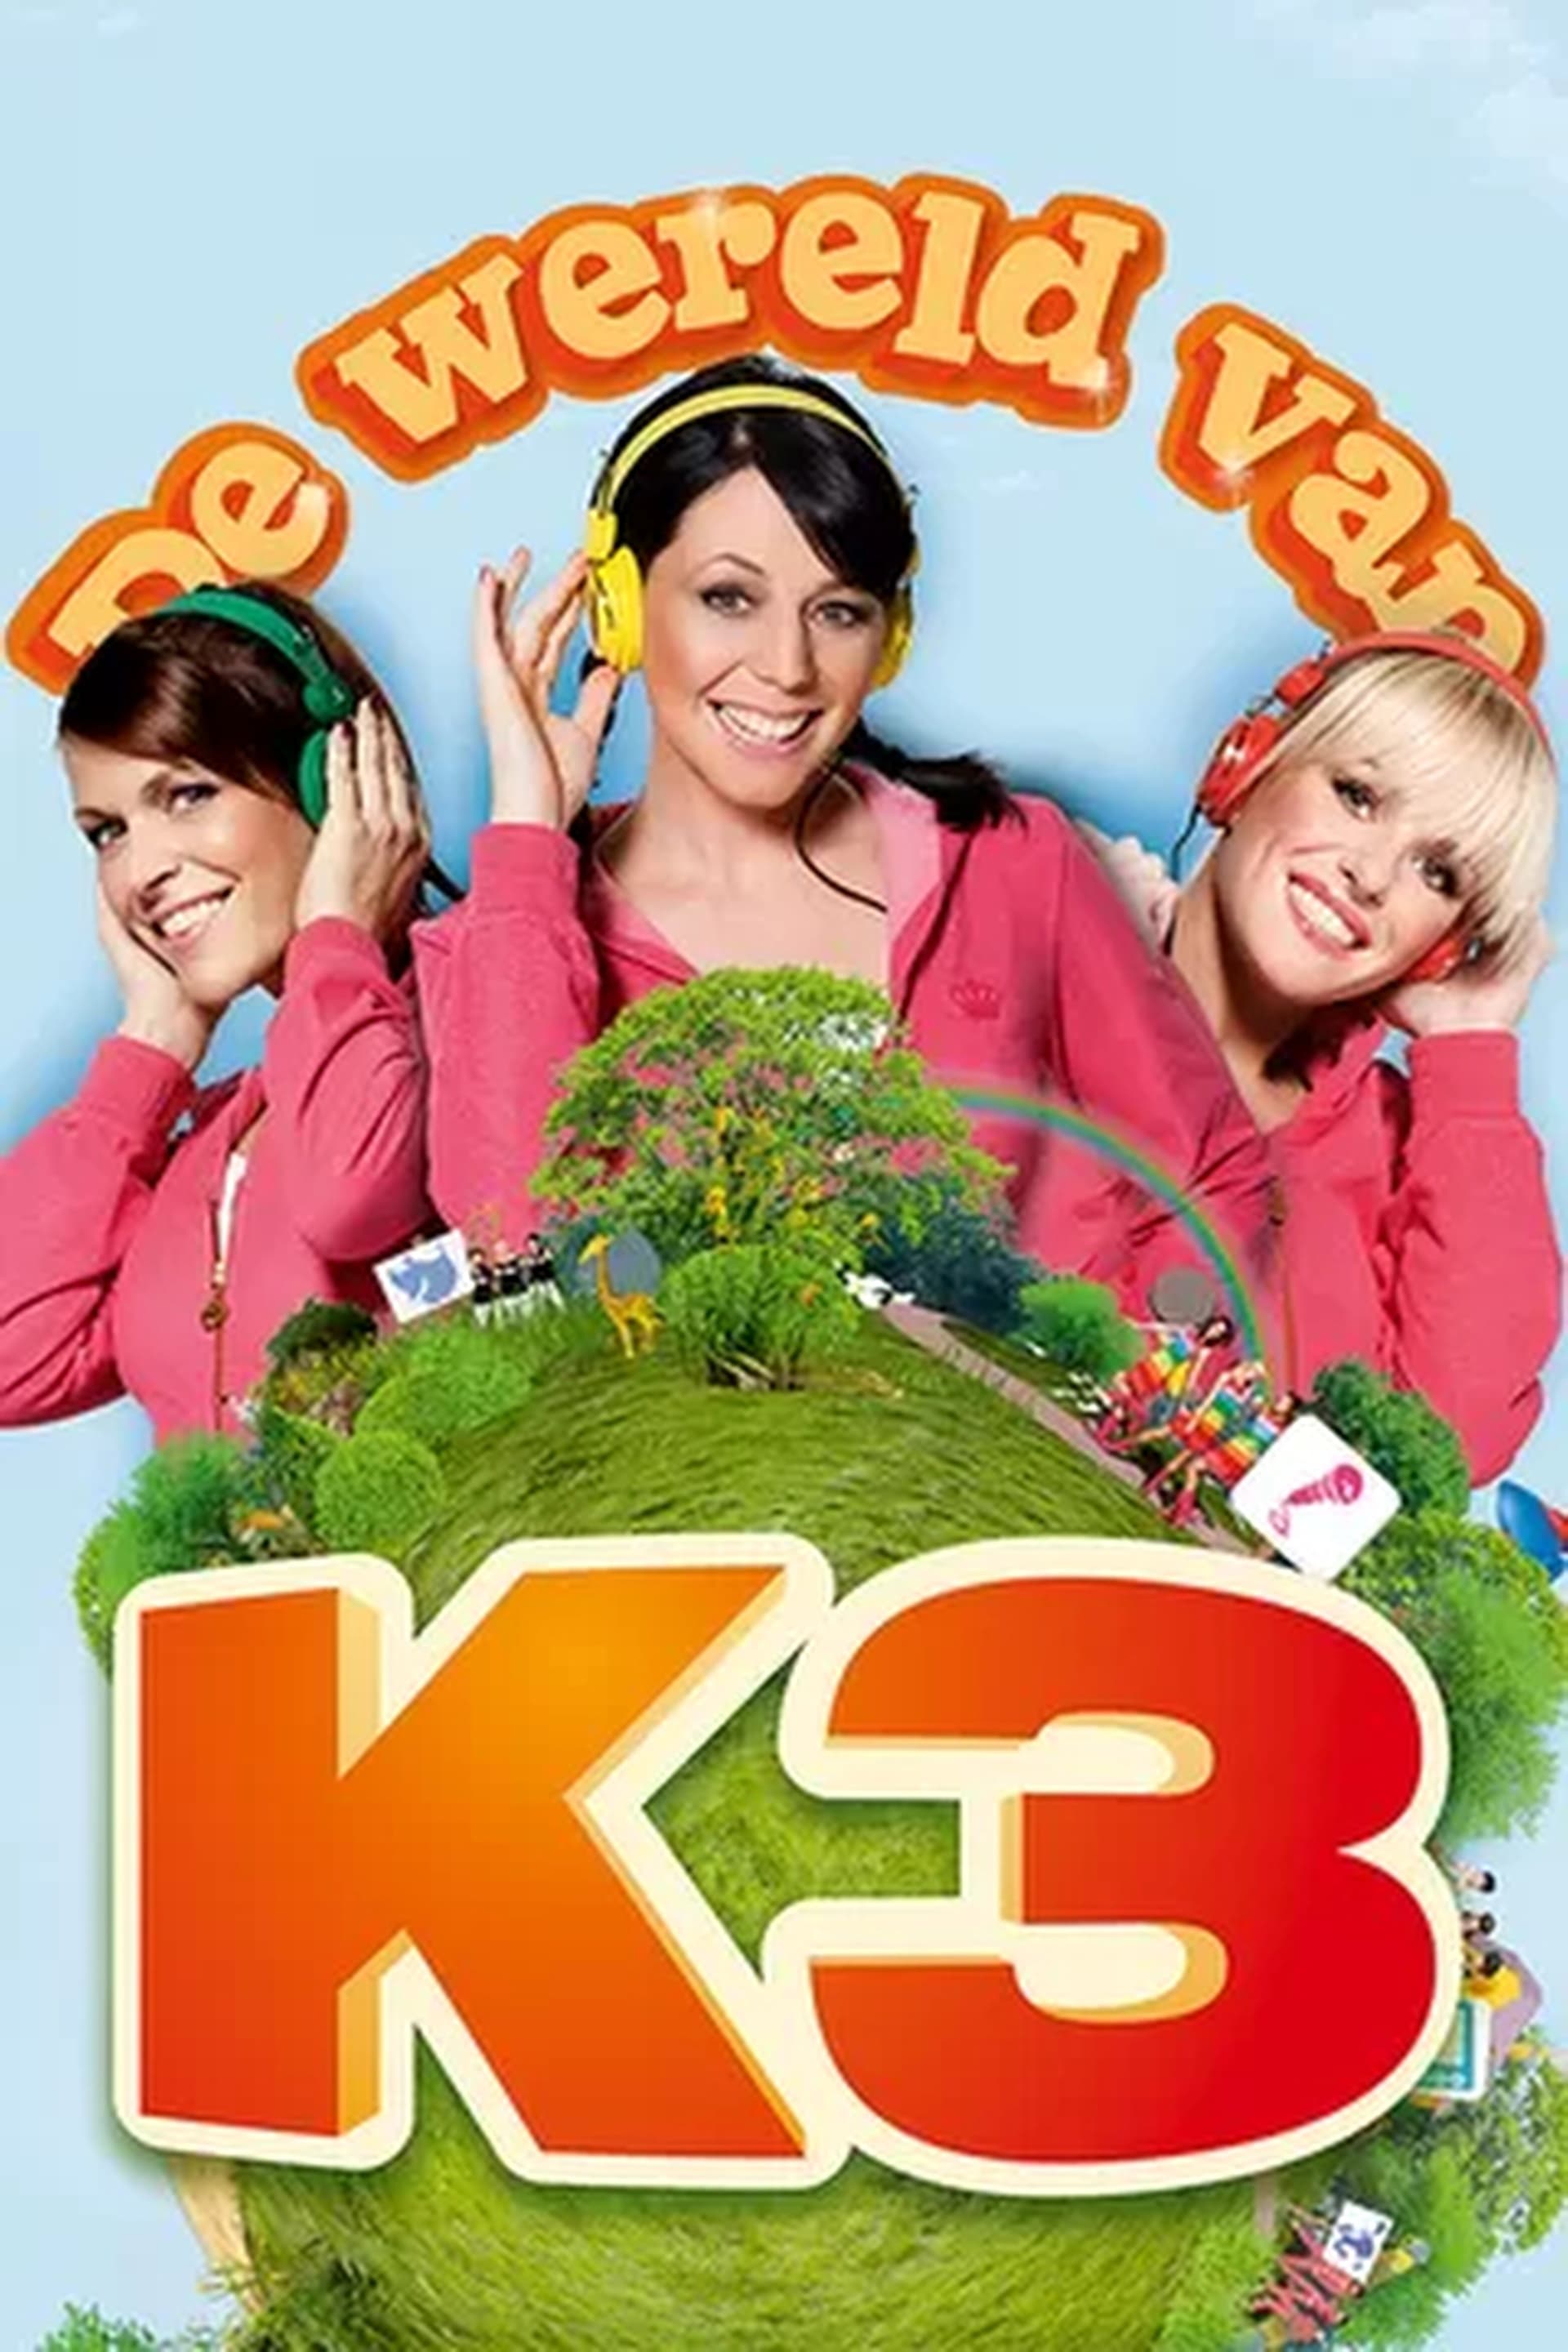 The World of K3